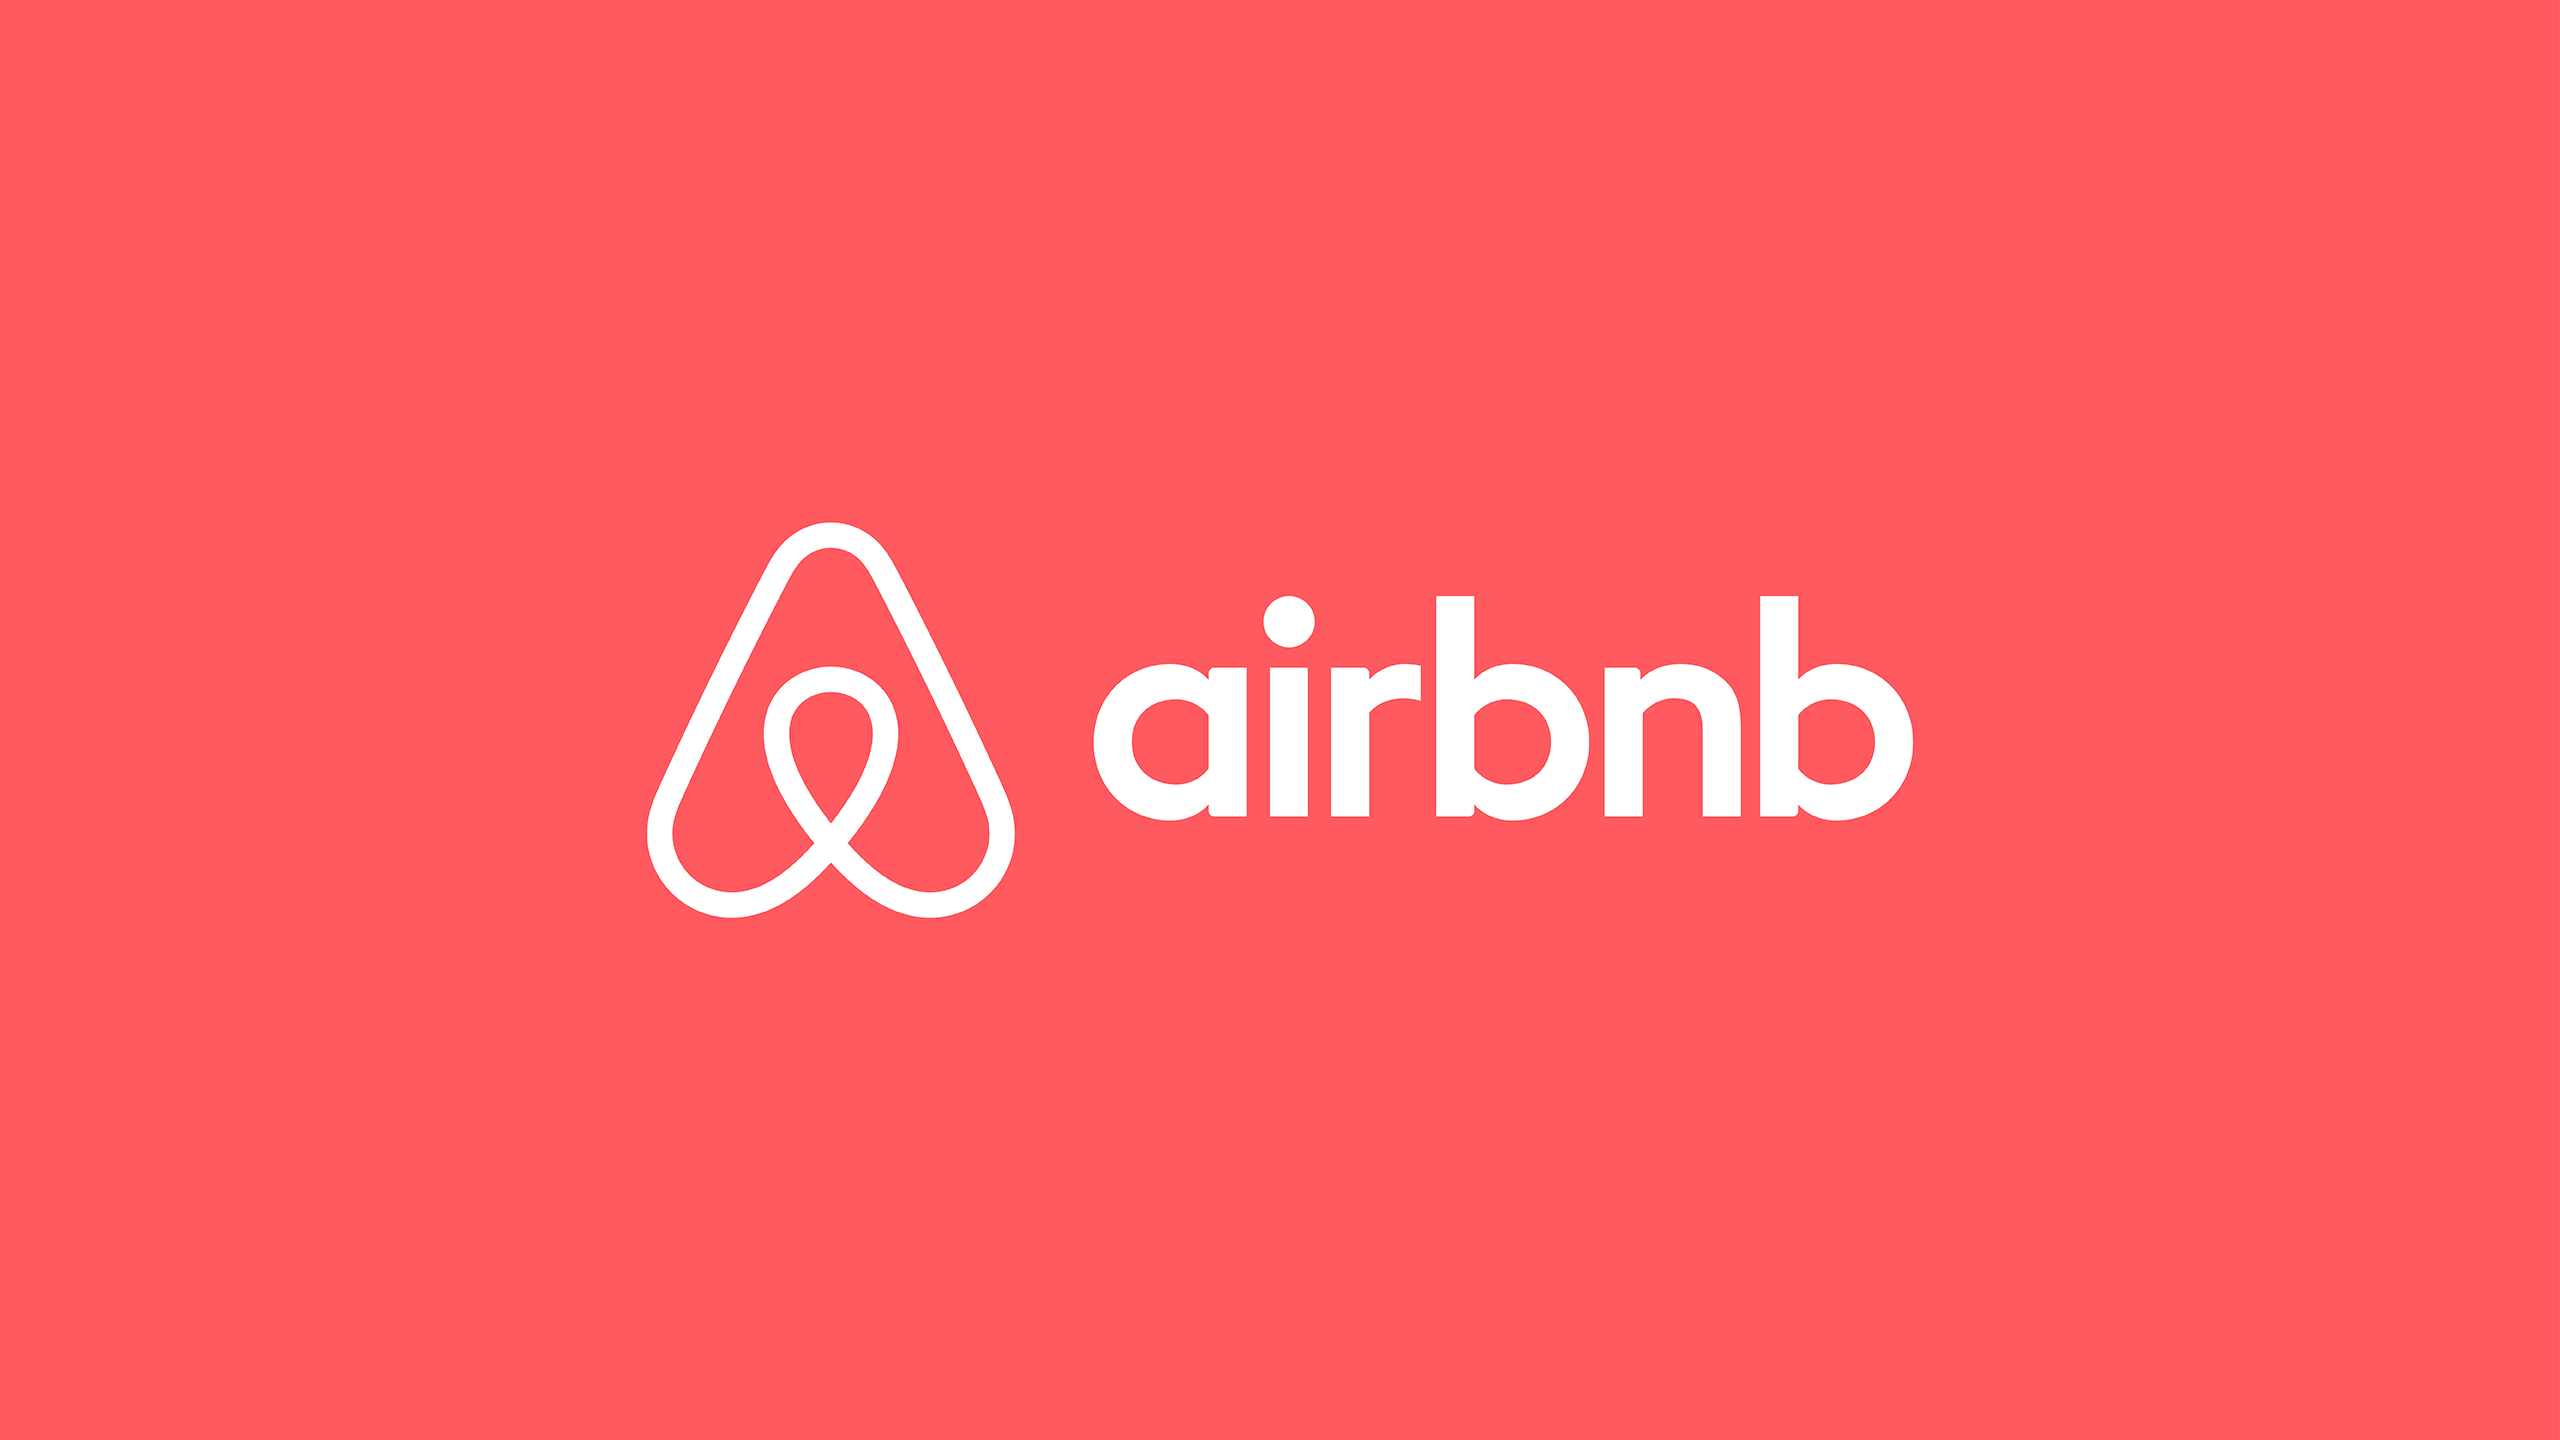 Airbnb . Logoed